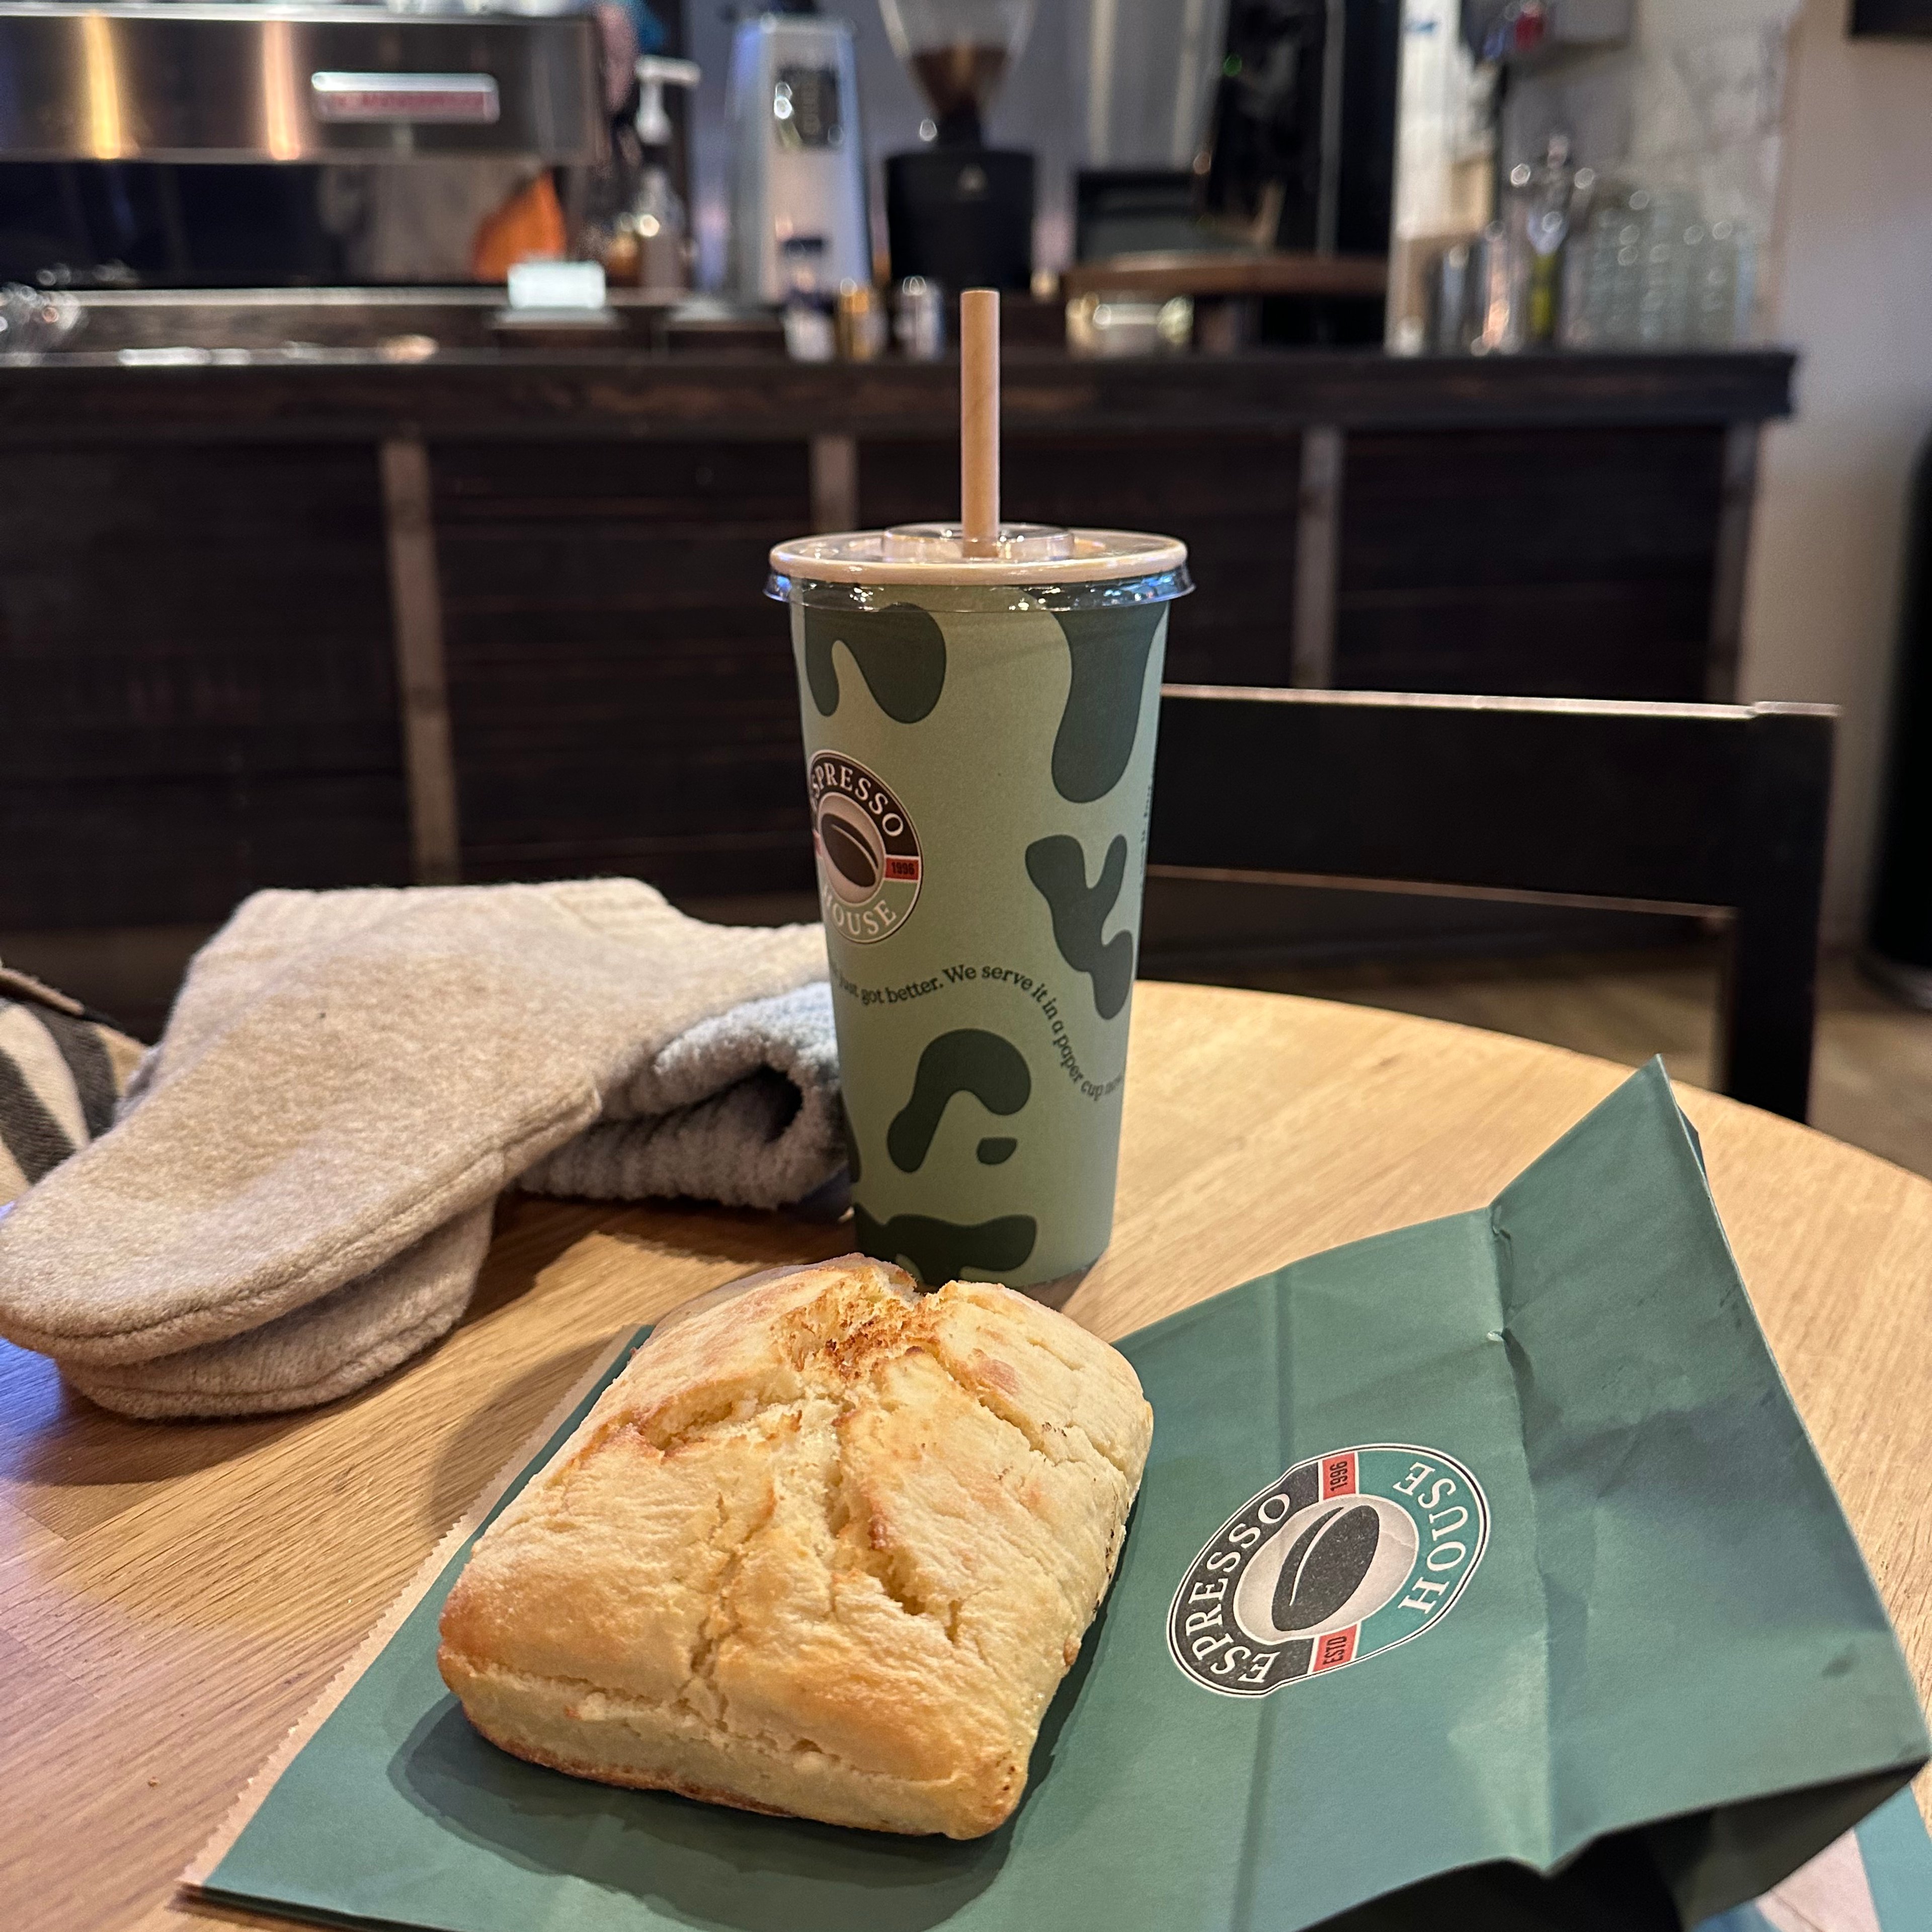 Classic scone and ice latte for your breakfast!